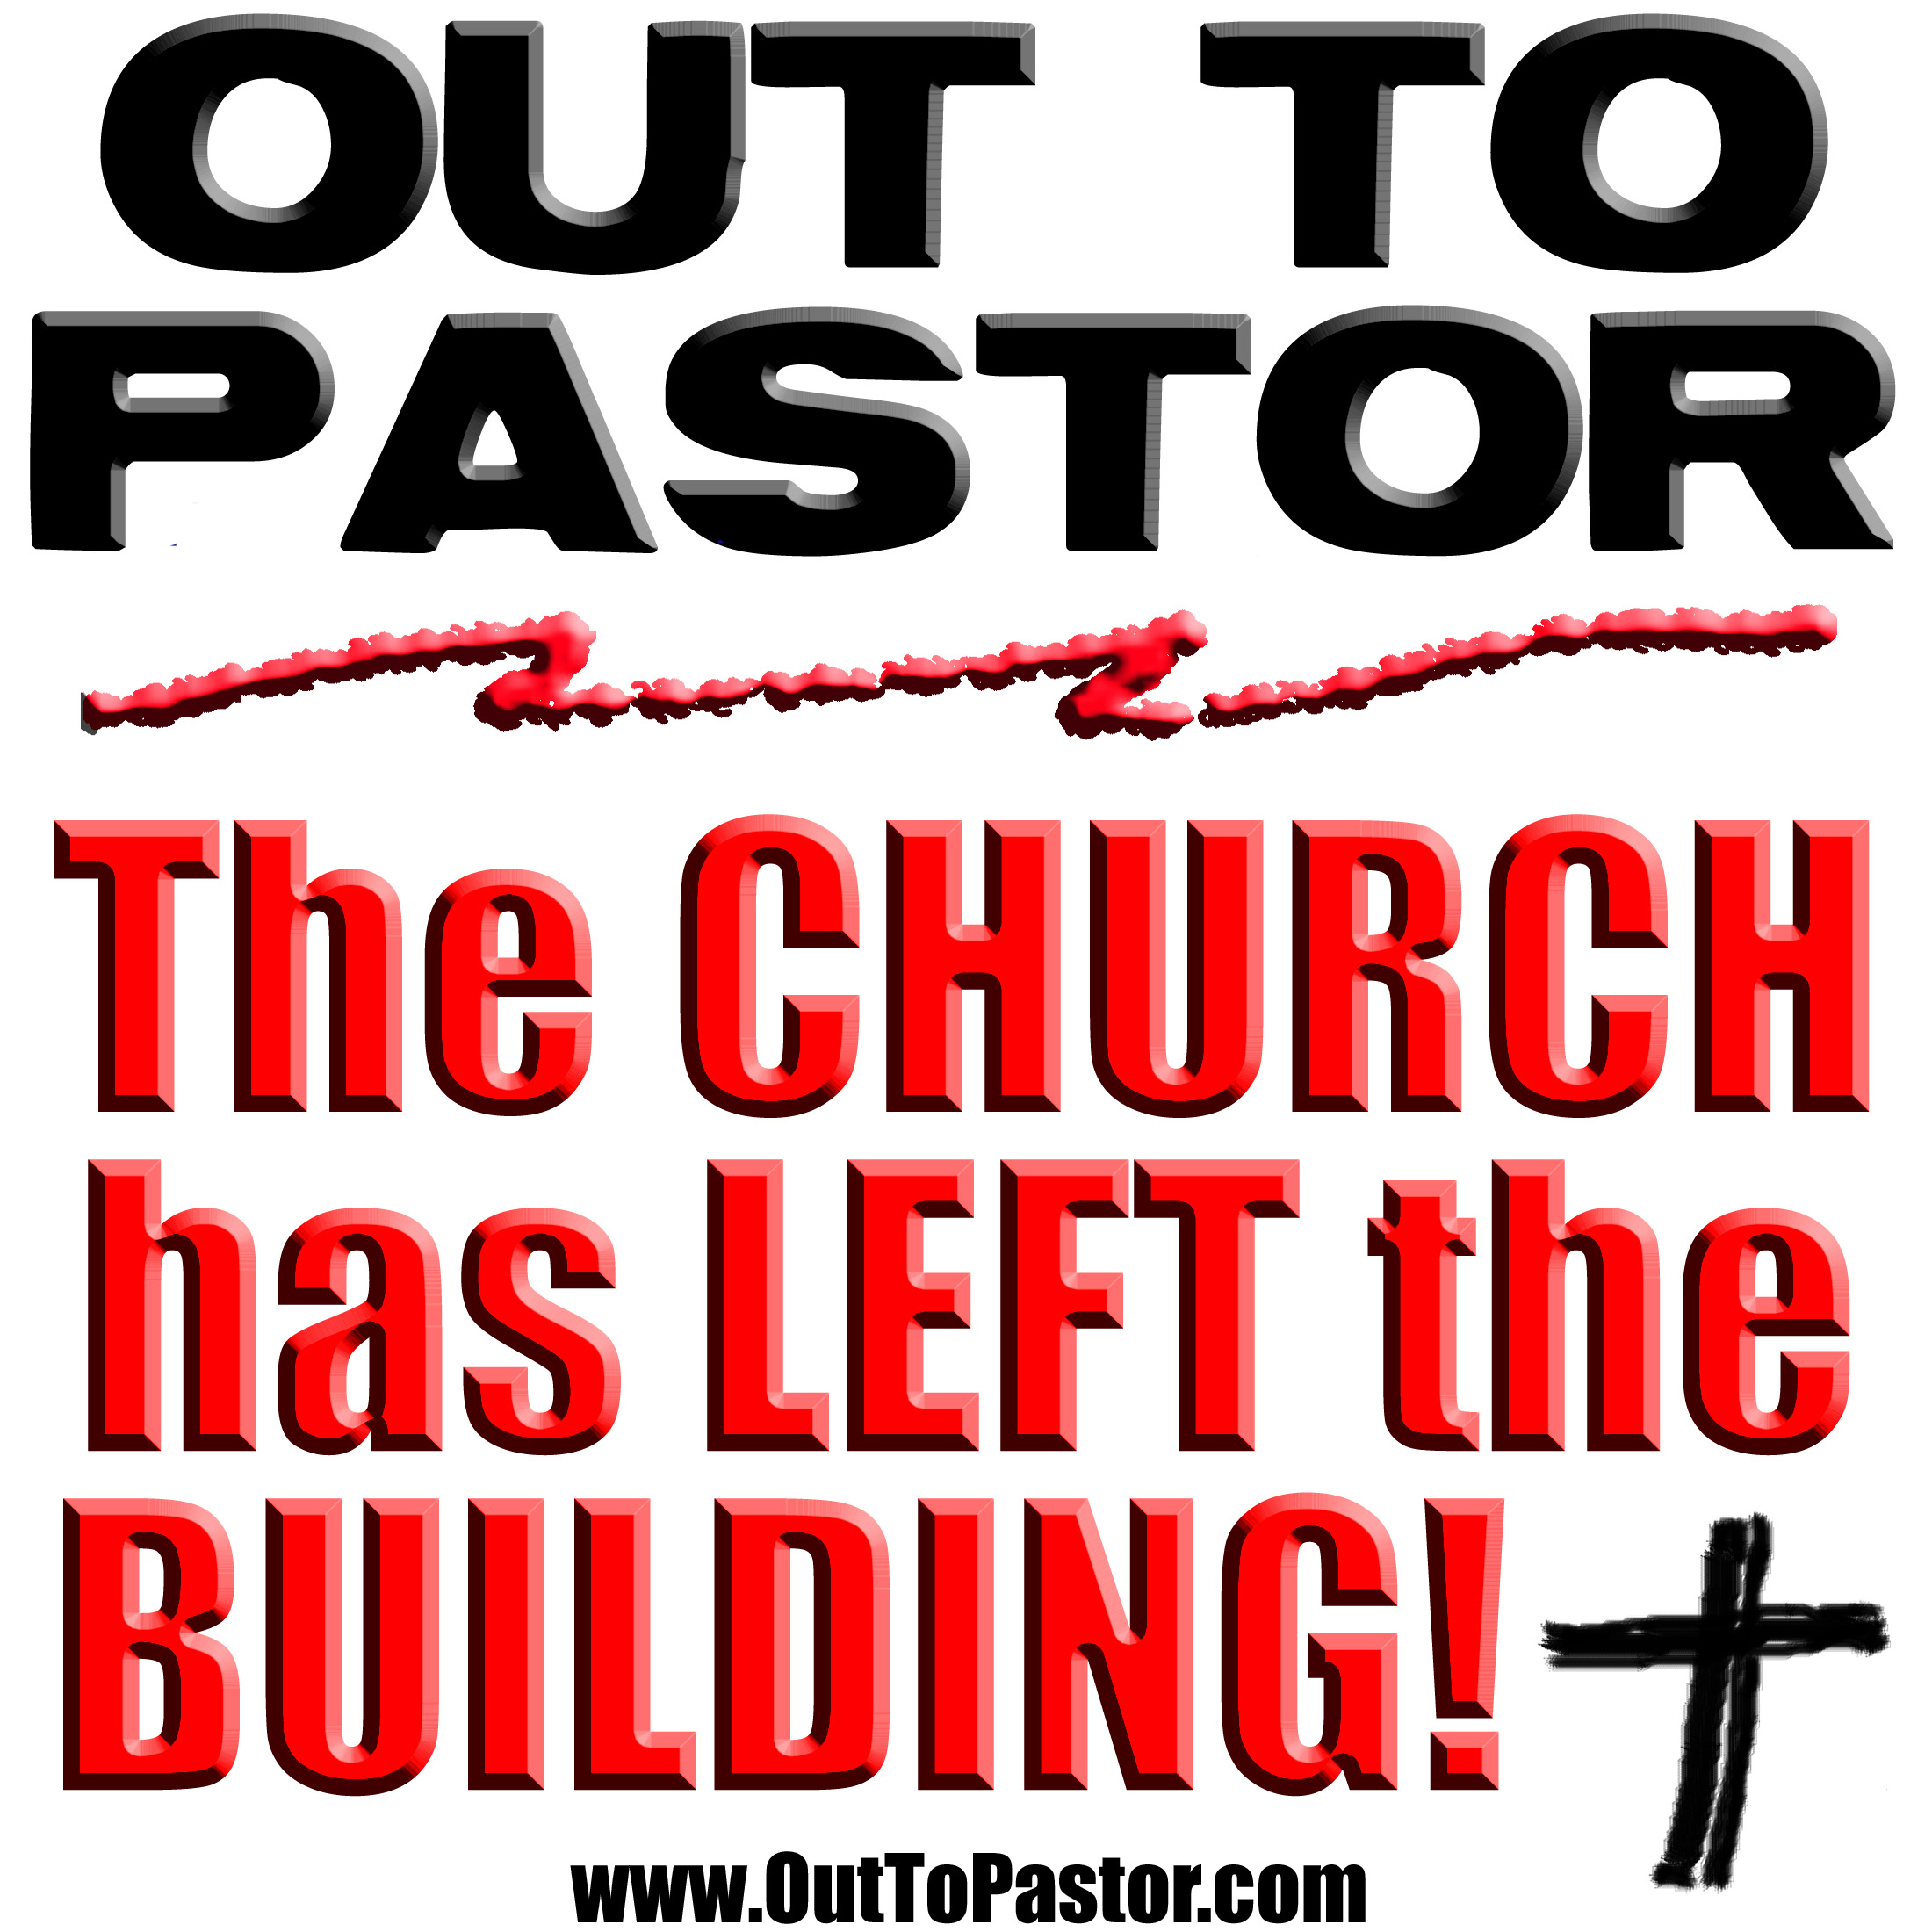 10x10_out_to_pastor_left_building